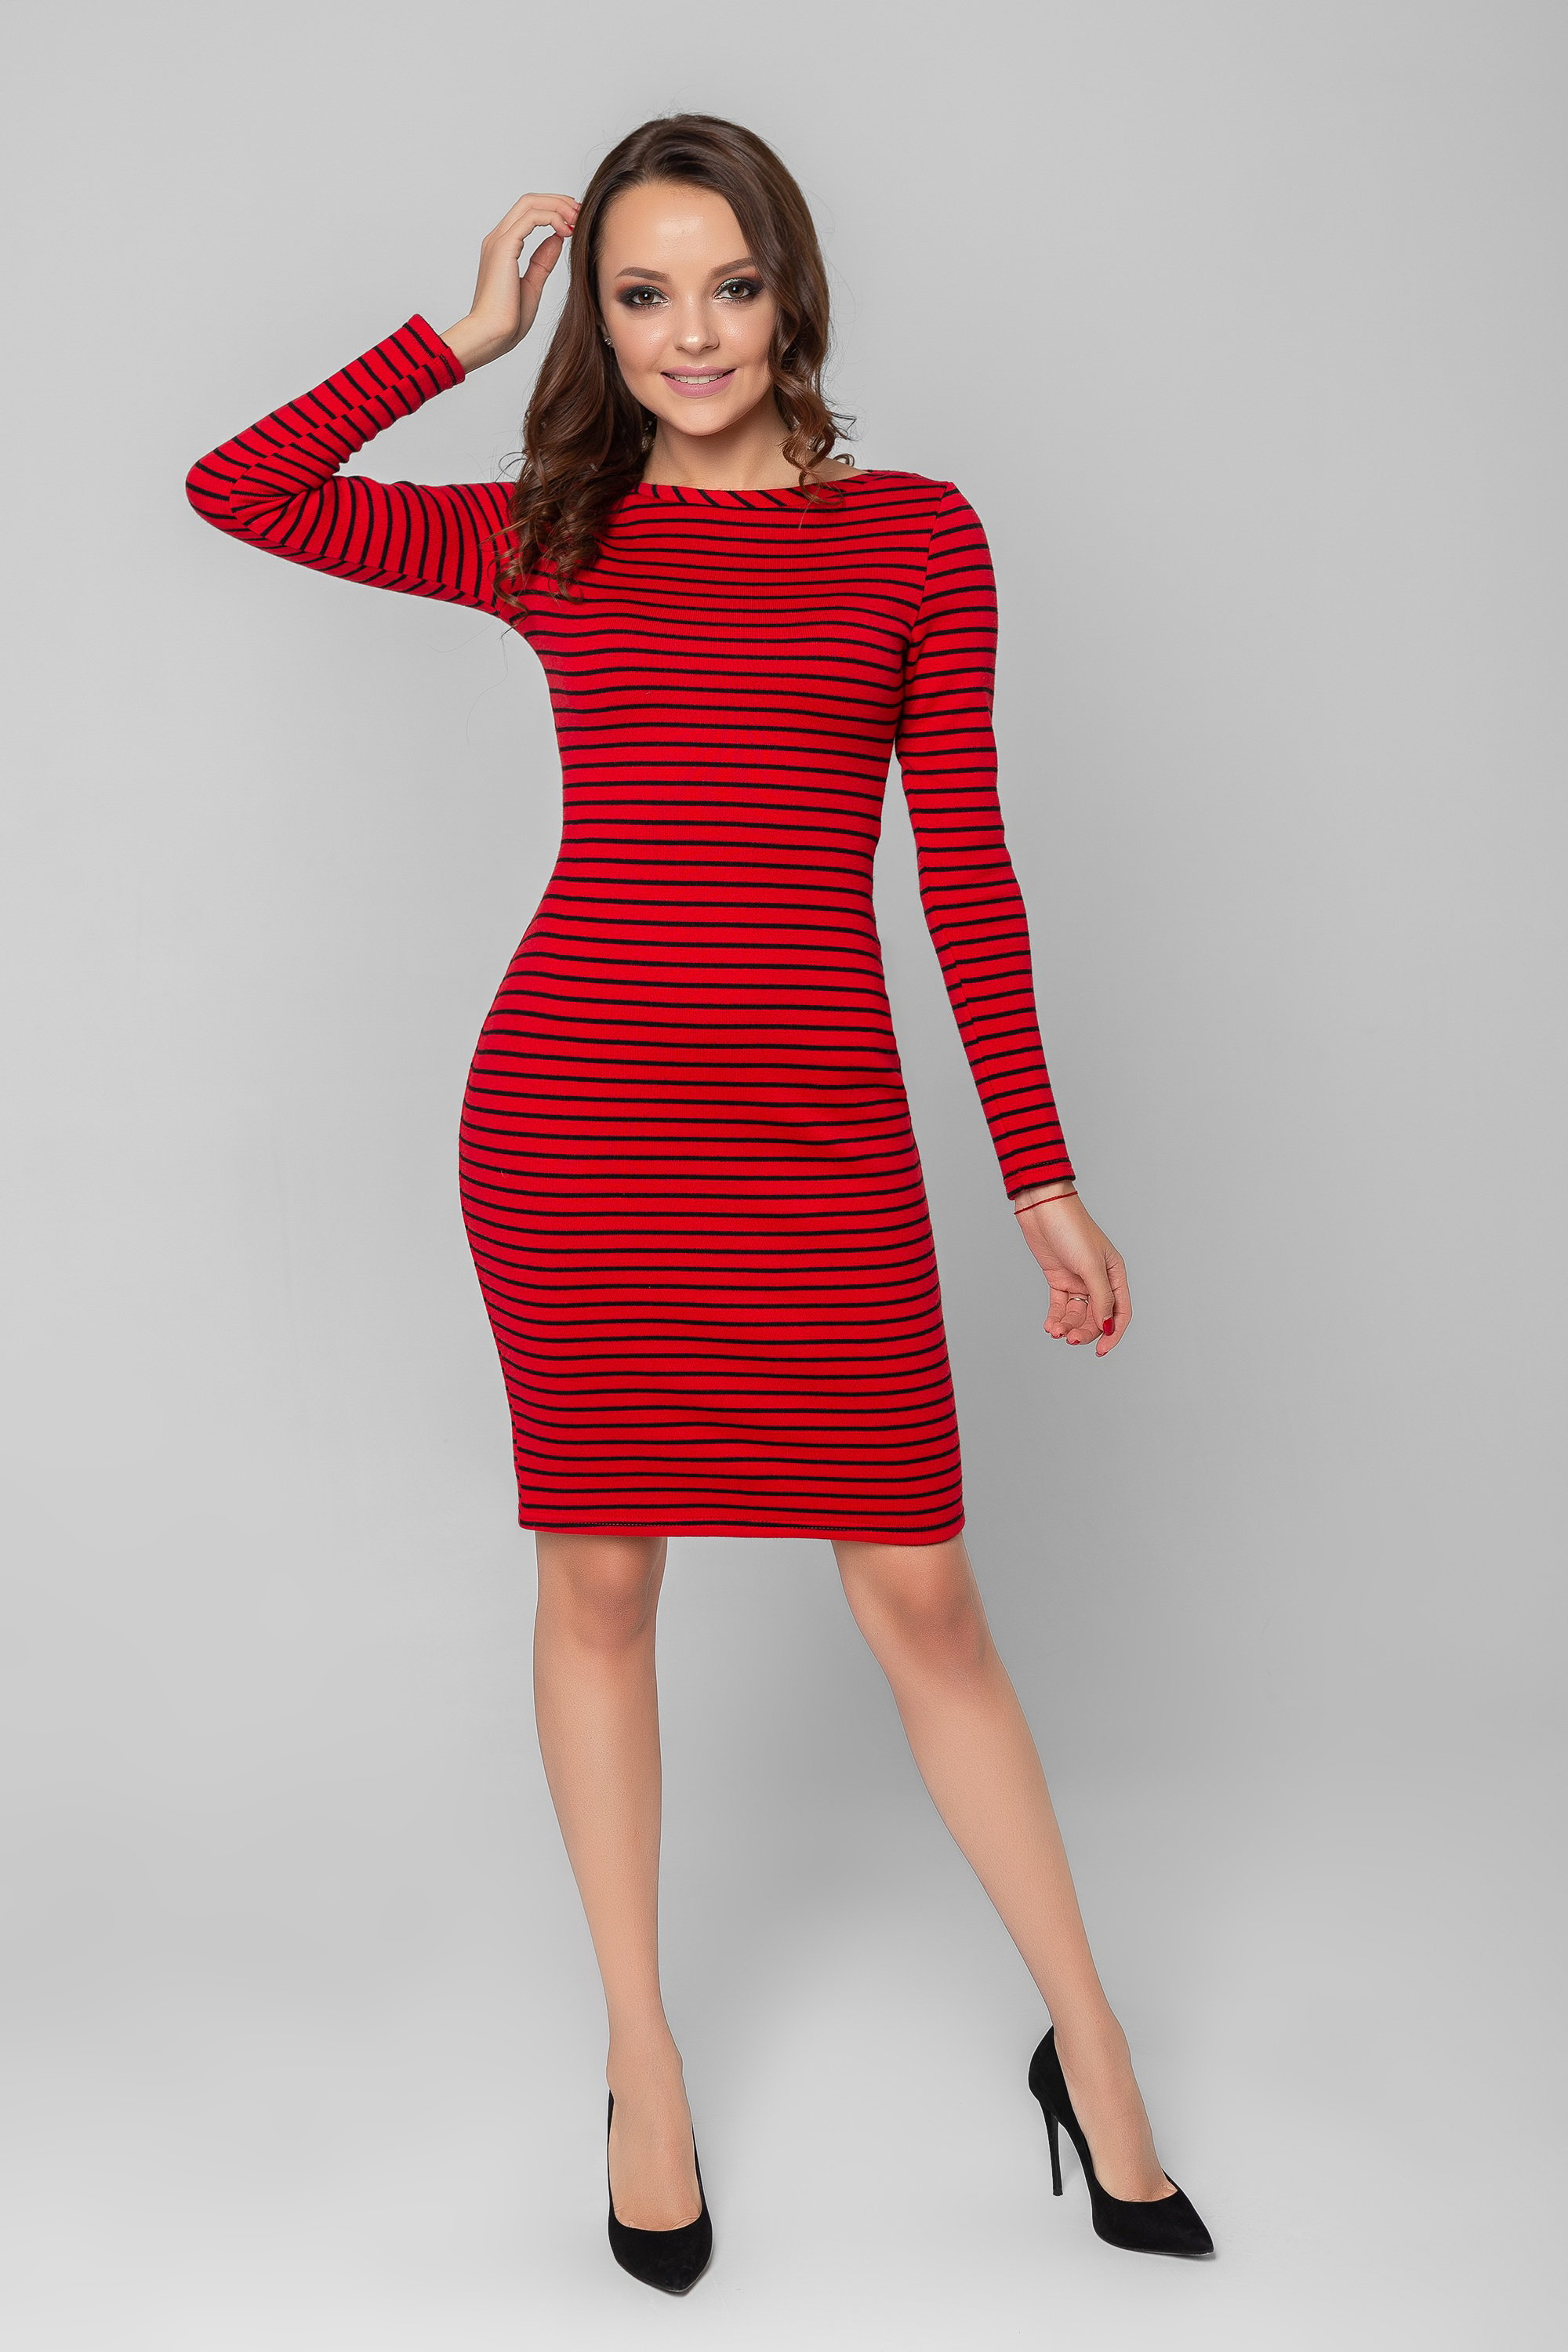 Warm striped silhouette dress in red